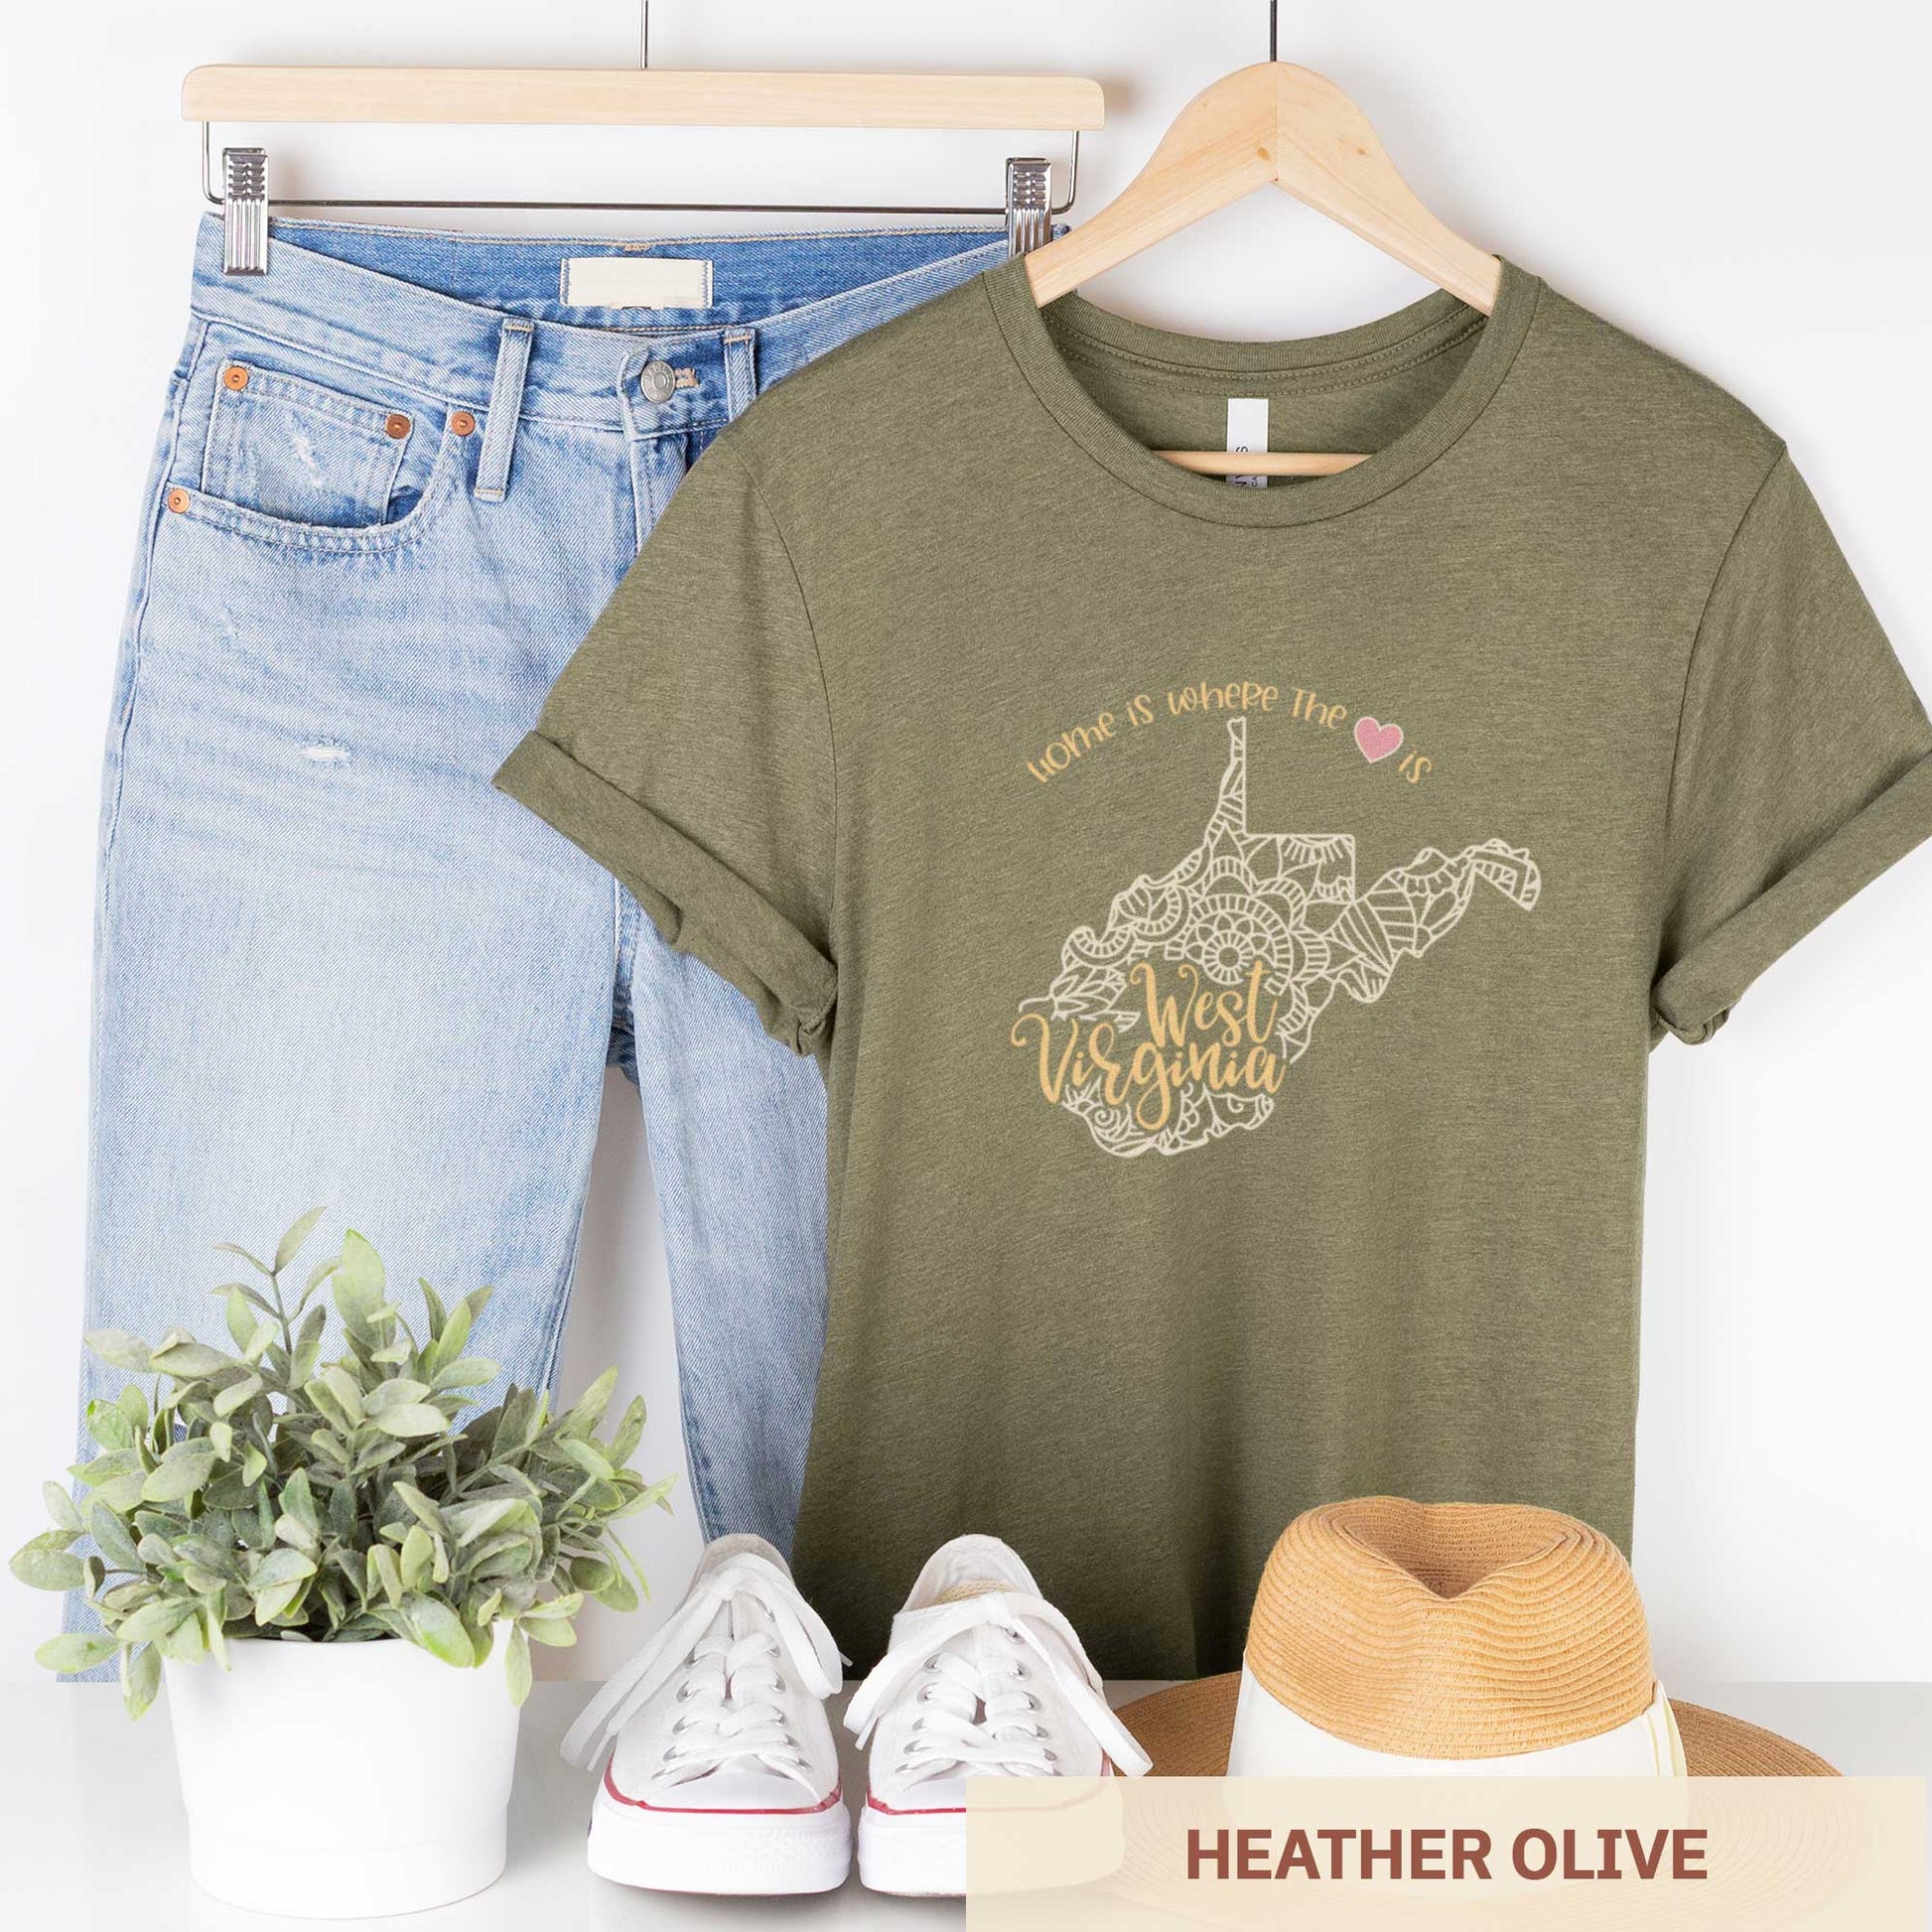 A hanging heather olive Bella Canvas t-shirt featuring a mandala in the shape of West Virginia with the words home is where the heart is.